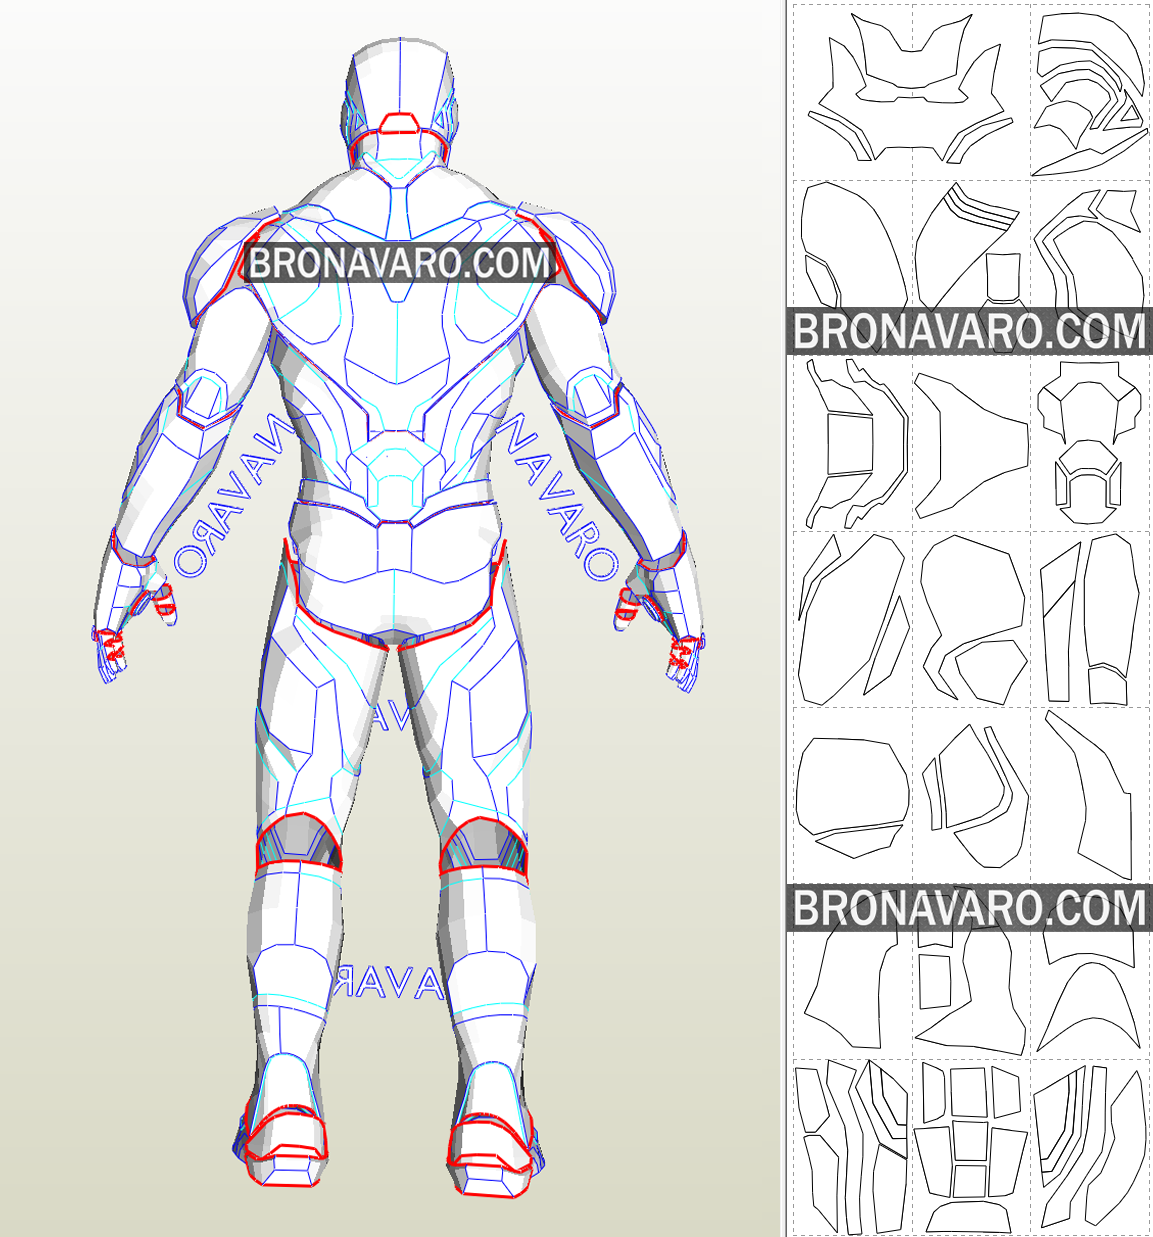 How to build an Iron Man suit